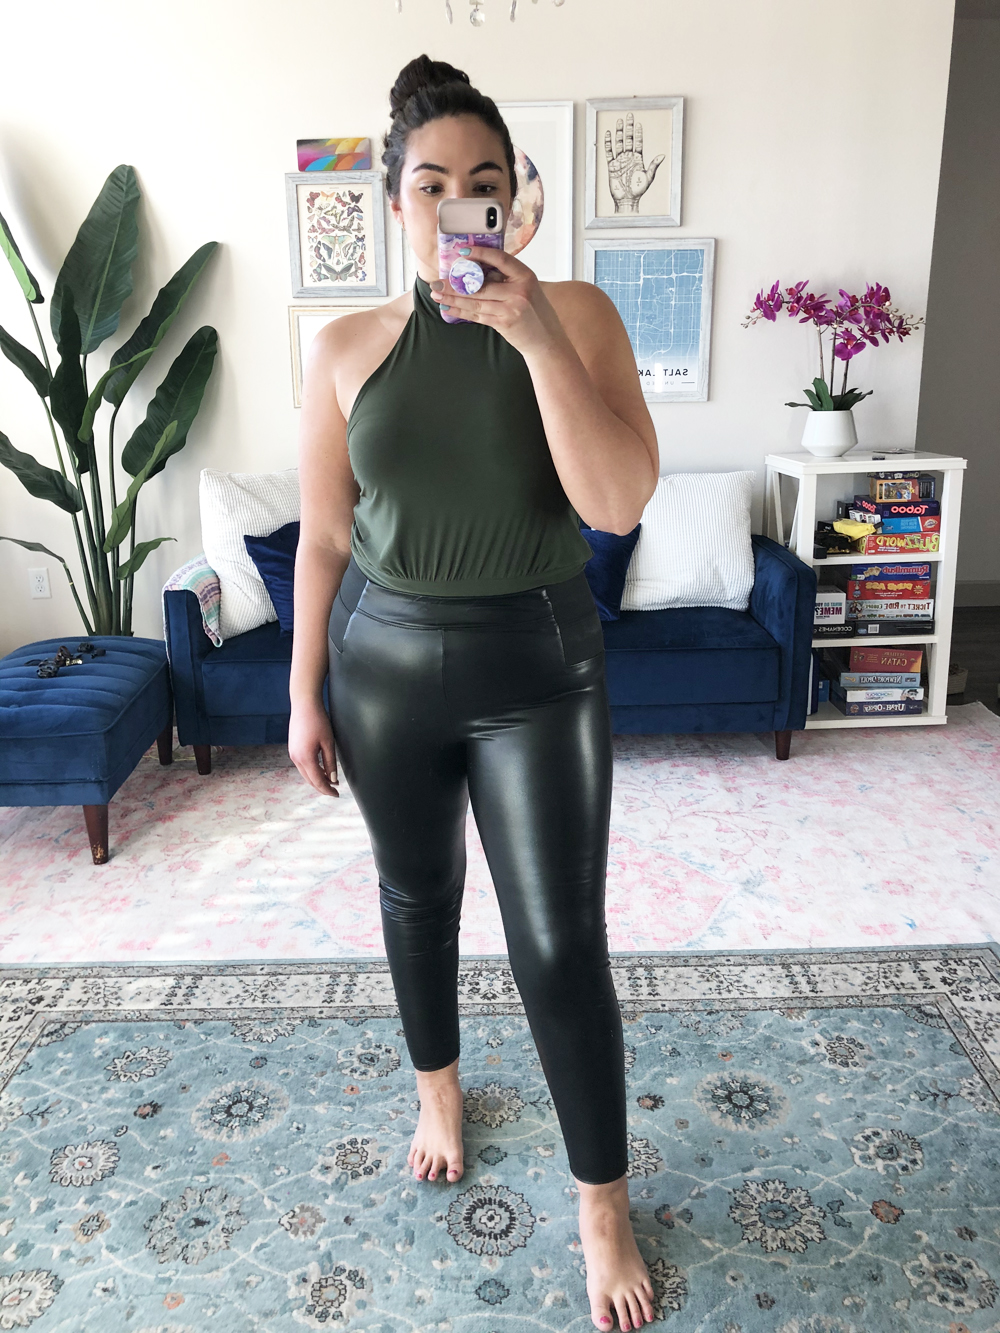 Spanx faux leather leggings are $20 off